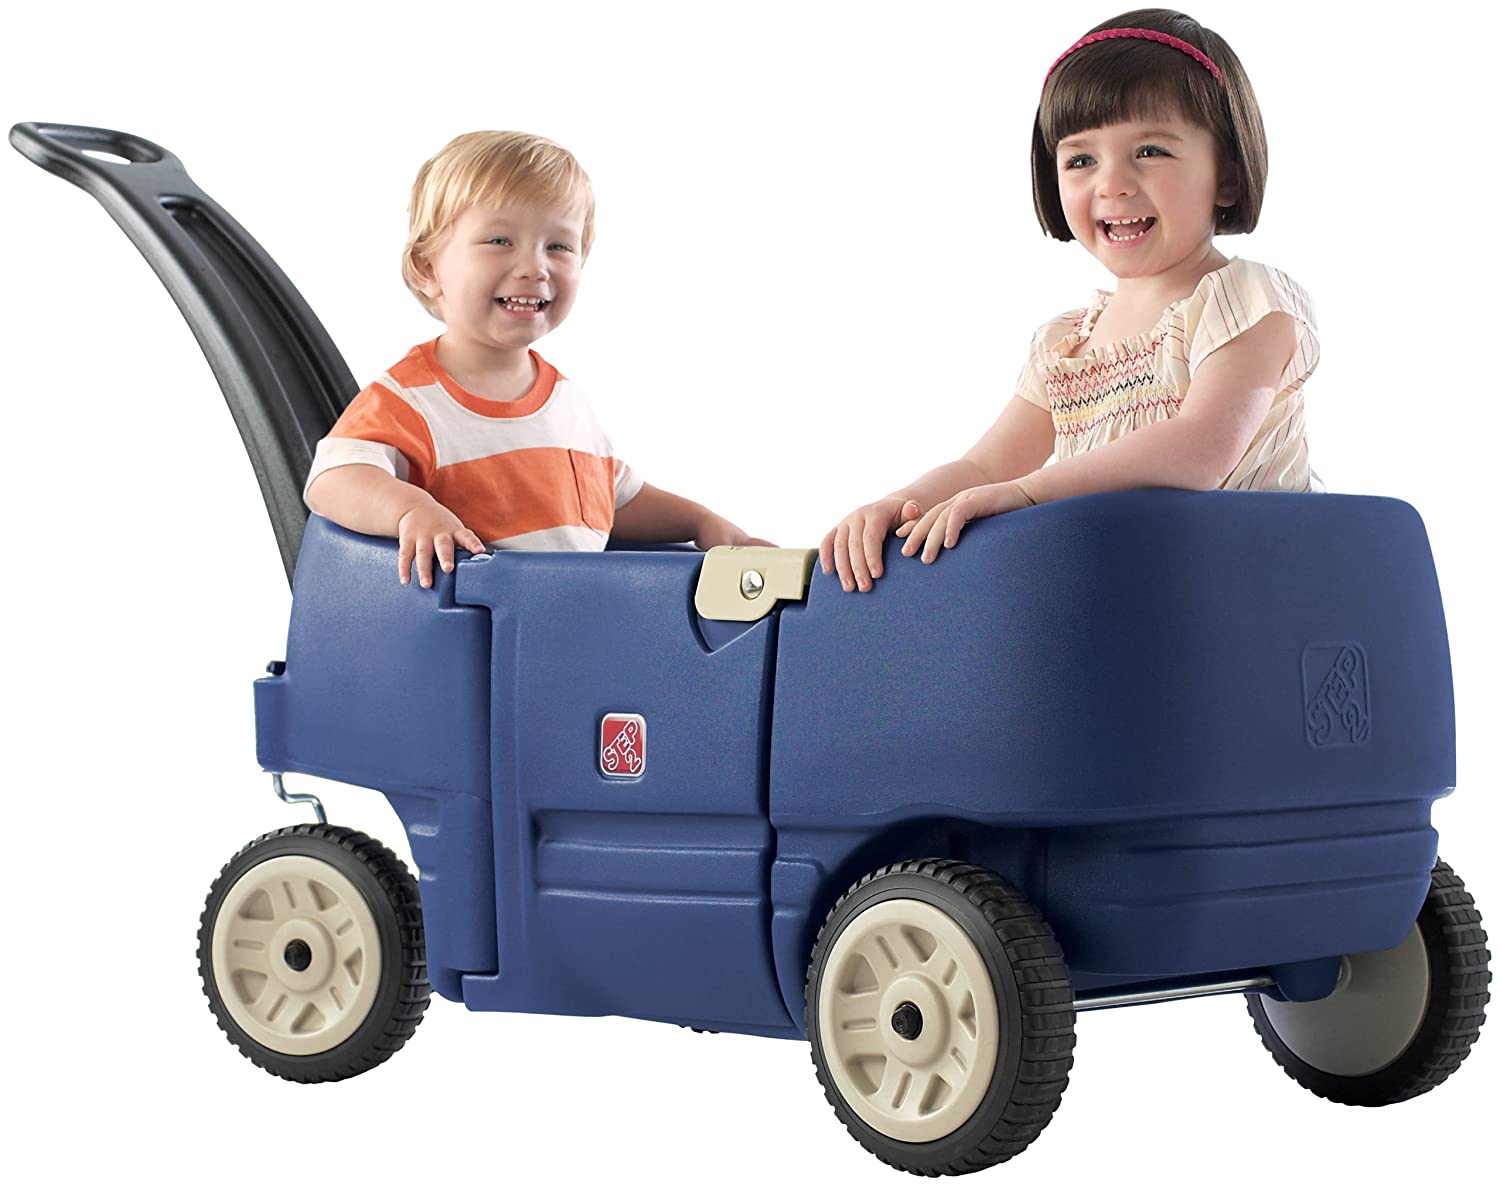 Top 10 Best Wagons for Kids Reviews in 2022 6